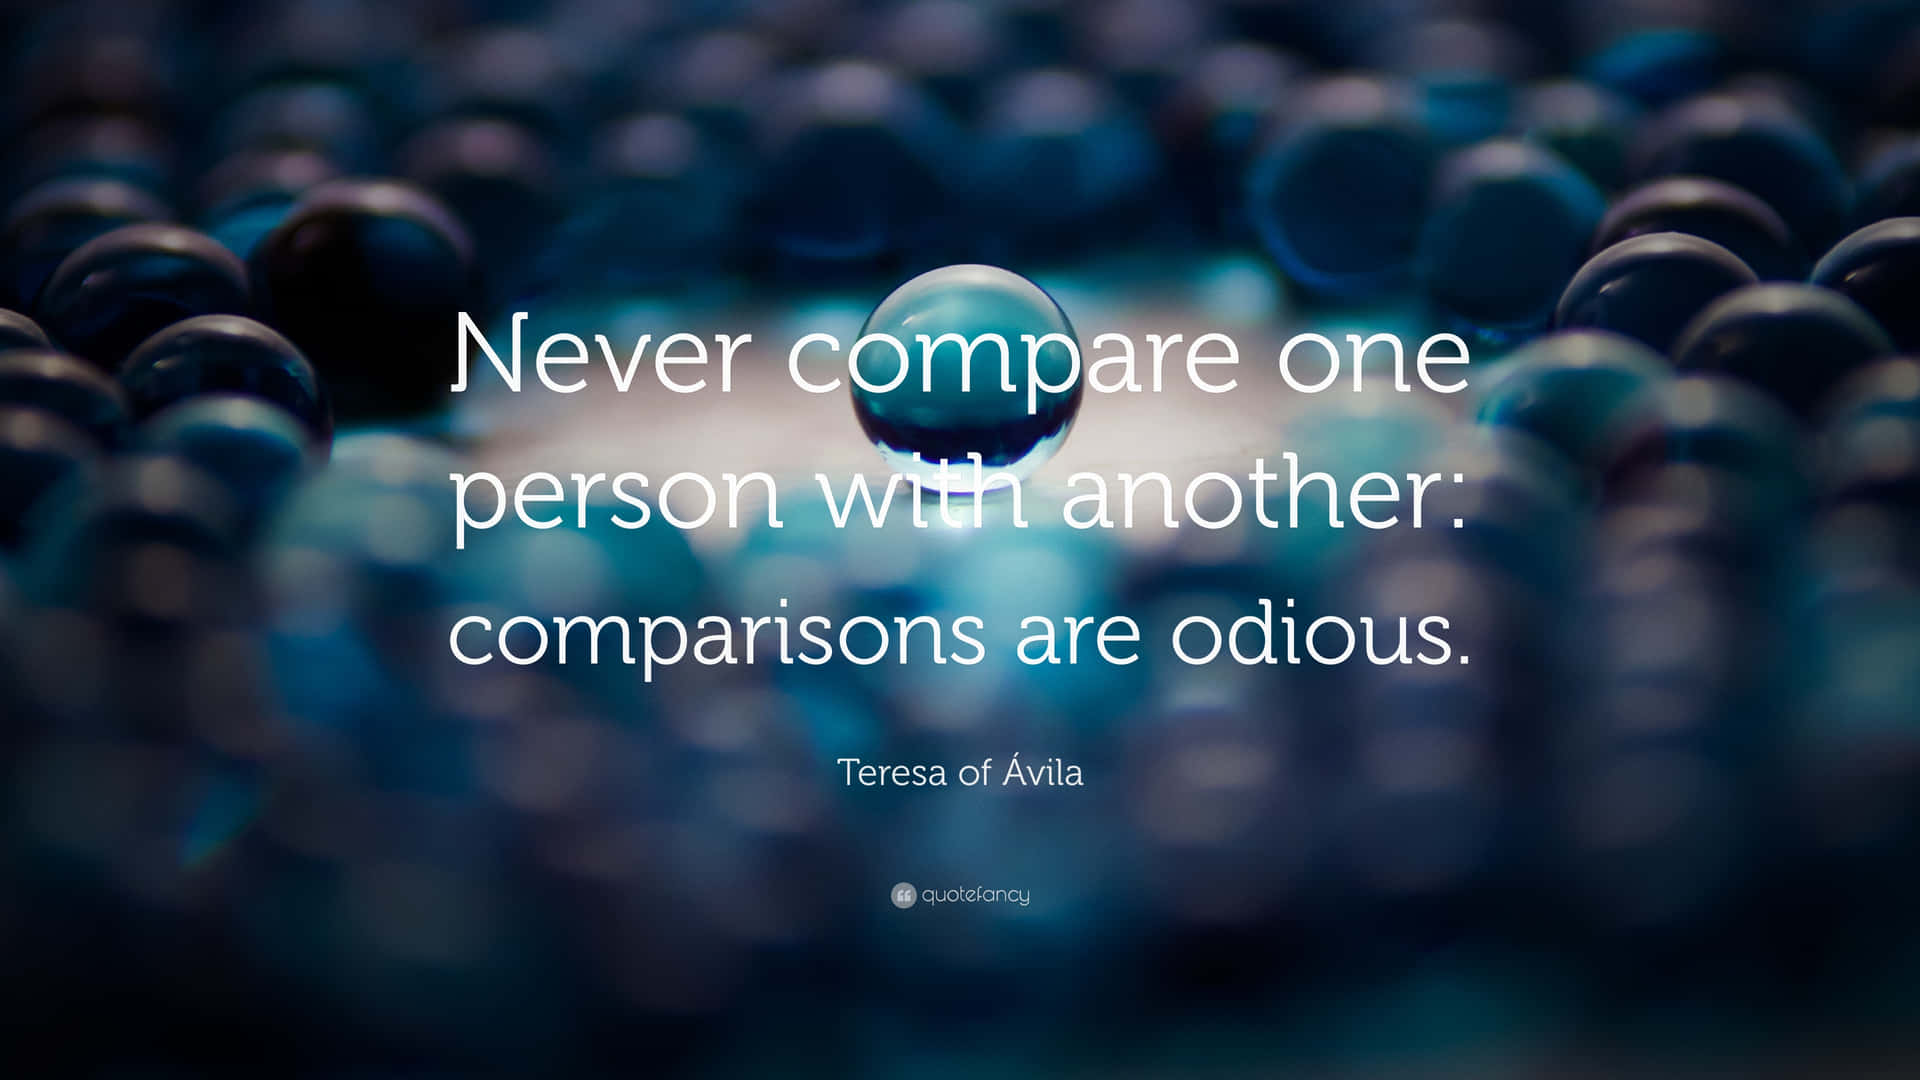 Odious Comparisons Quote Blue Wallpaper